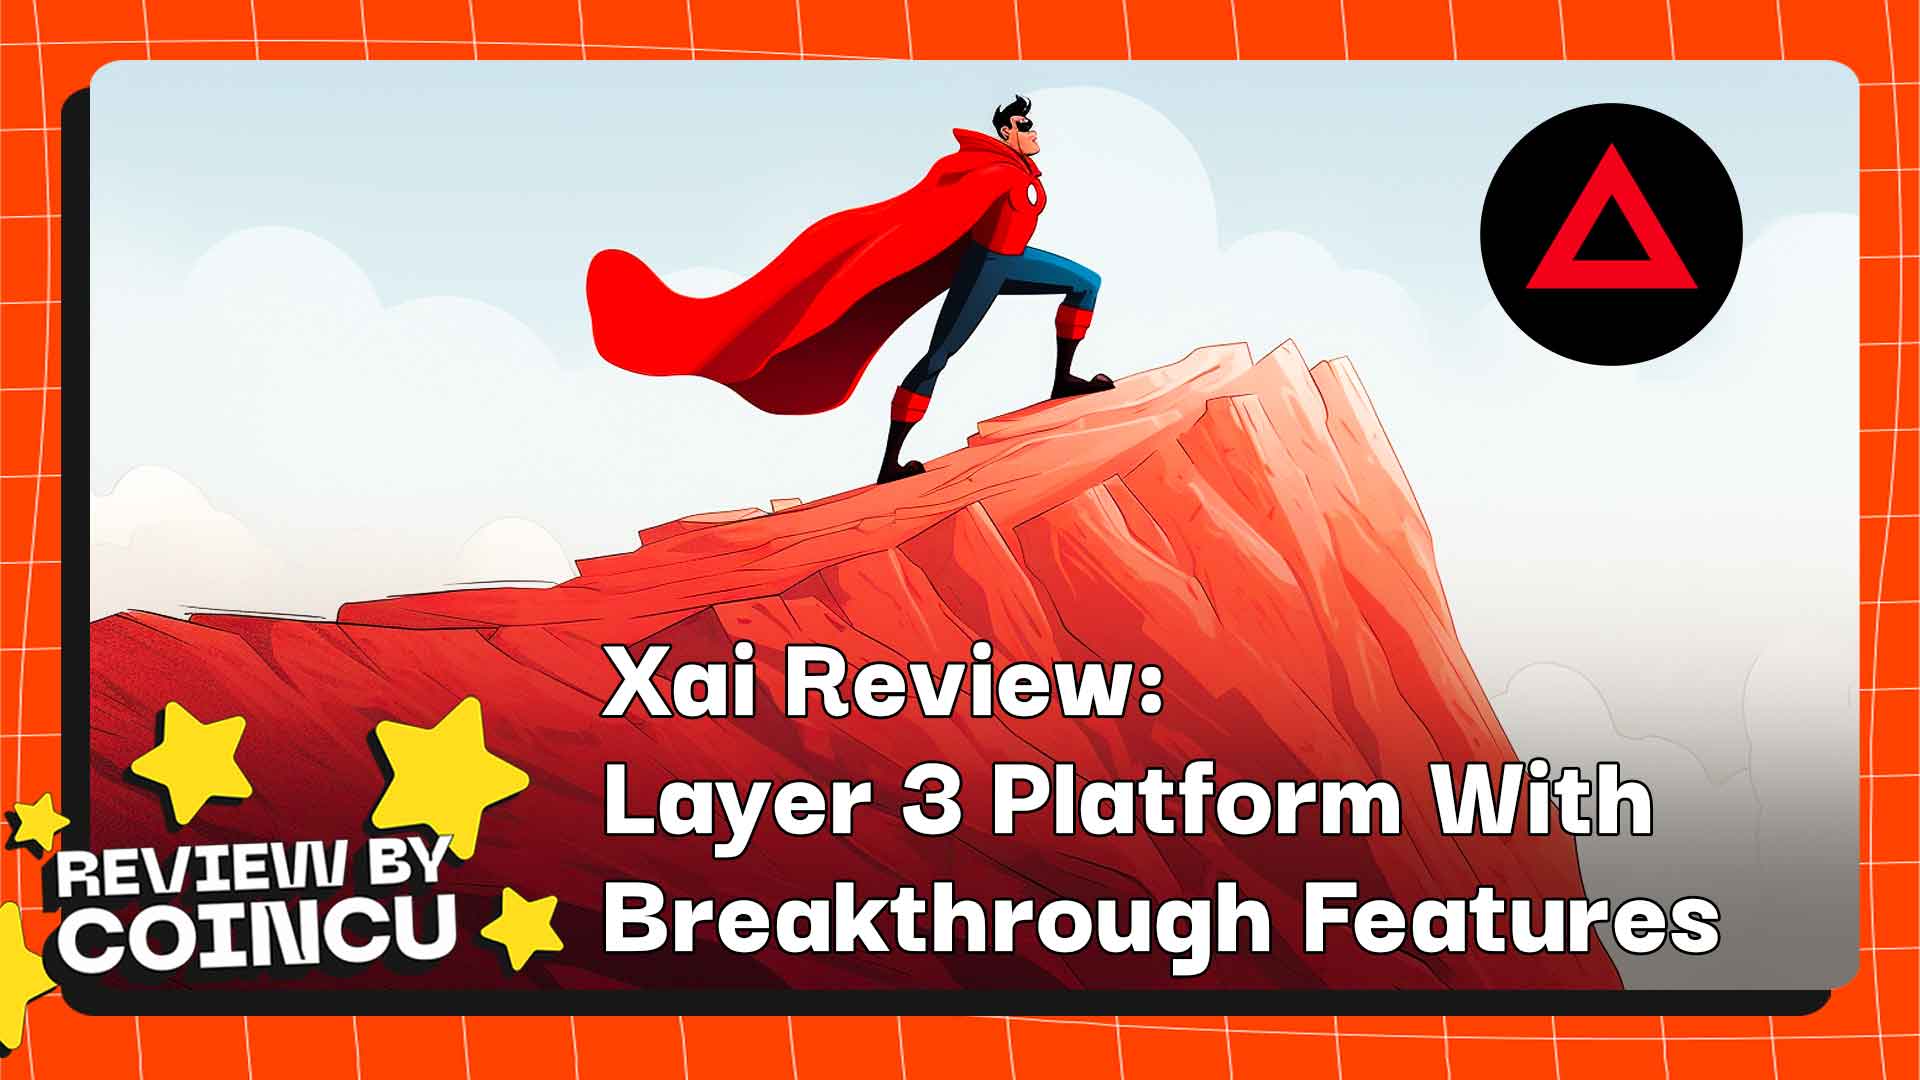 Xai Review: Layer 3 Platform With Breakthrough Features